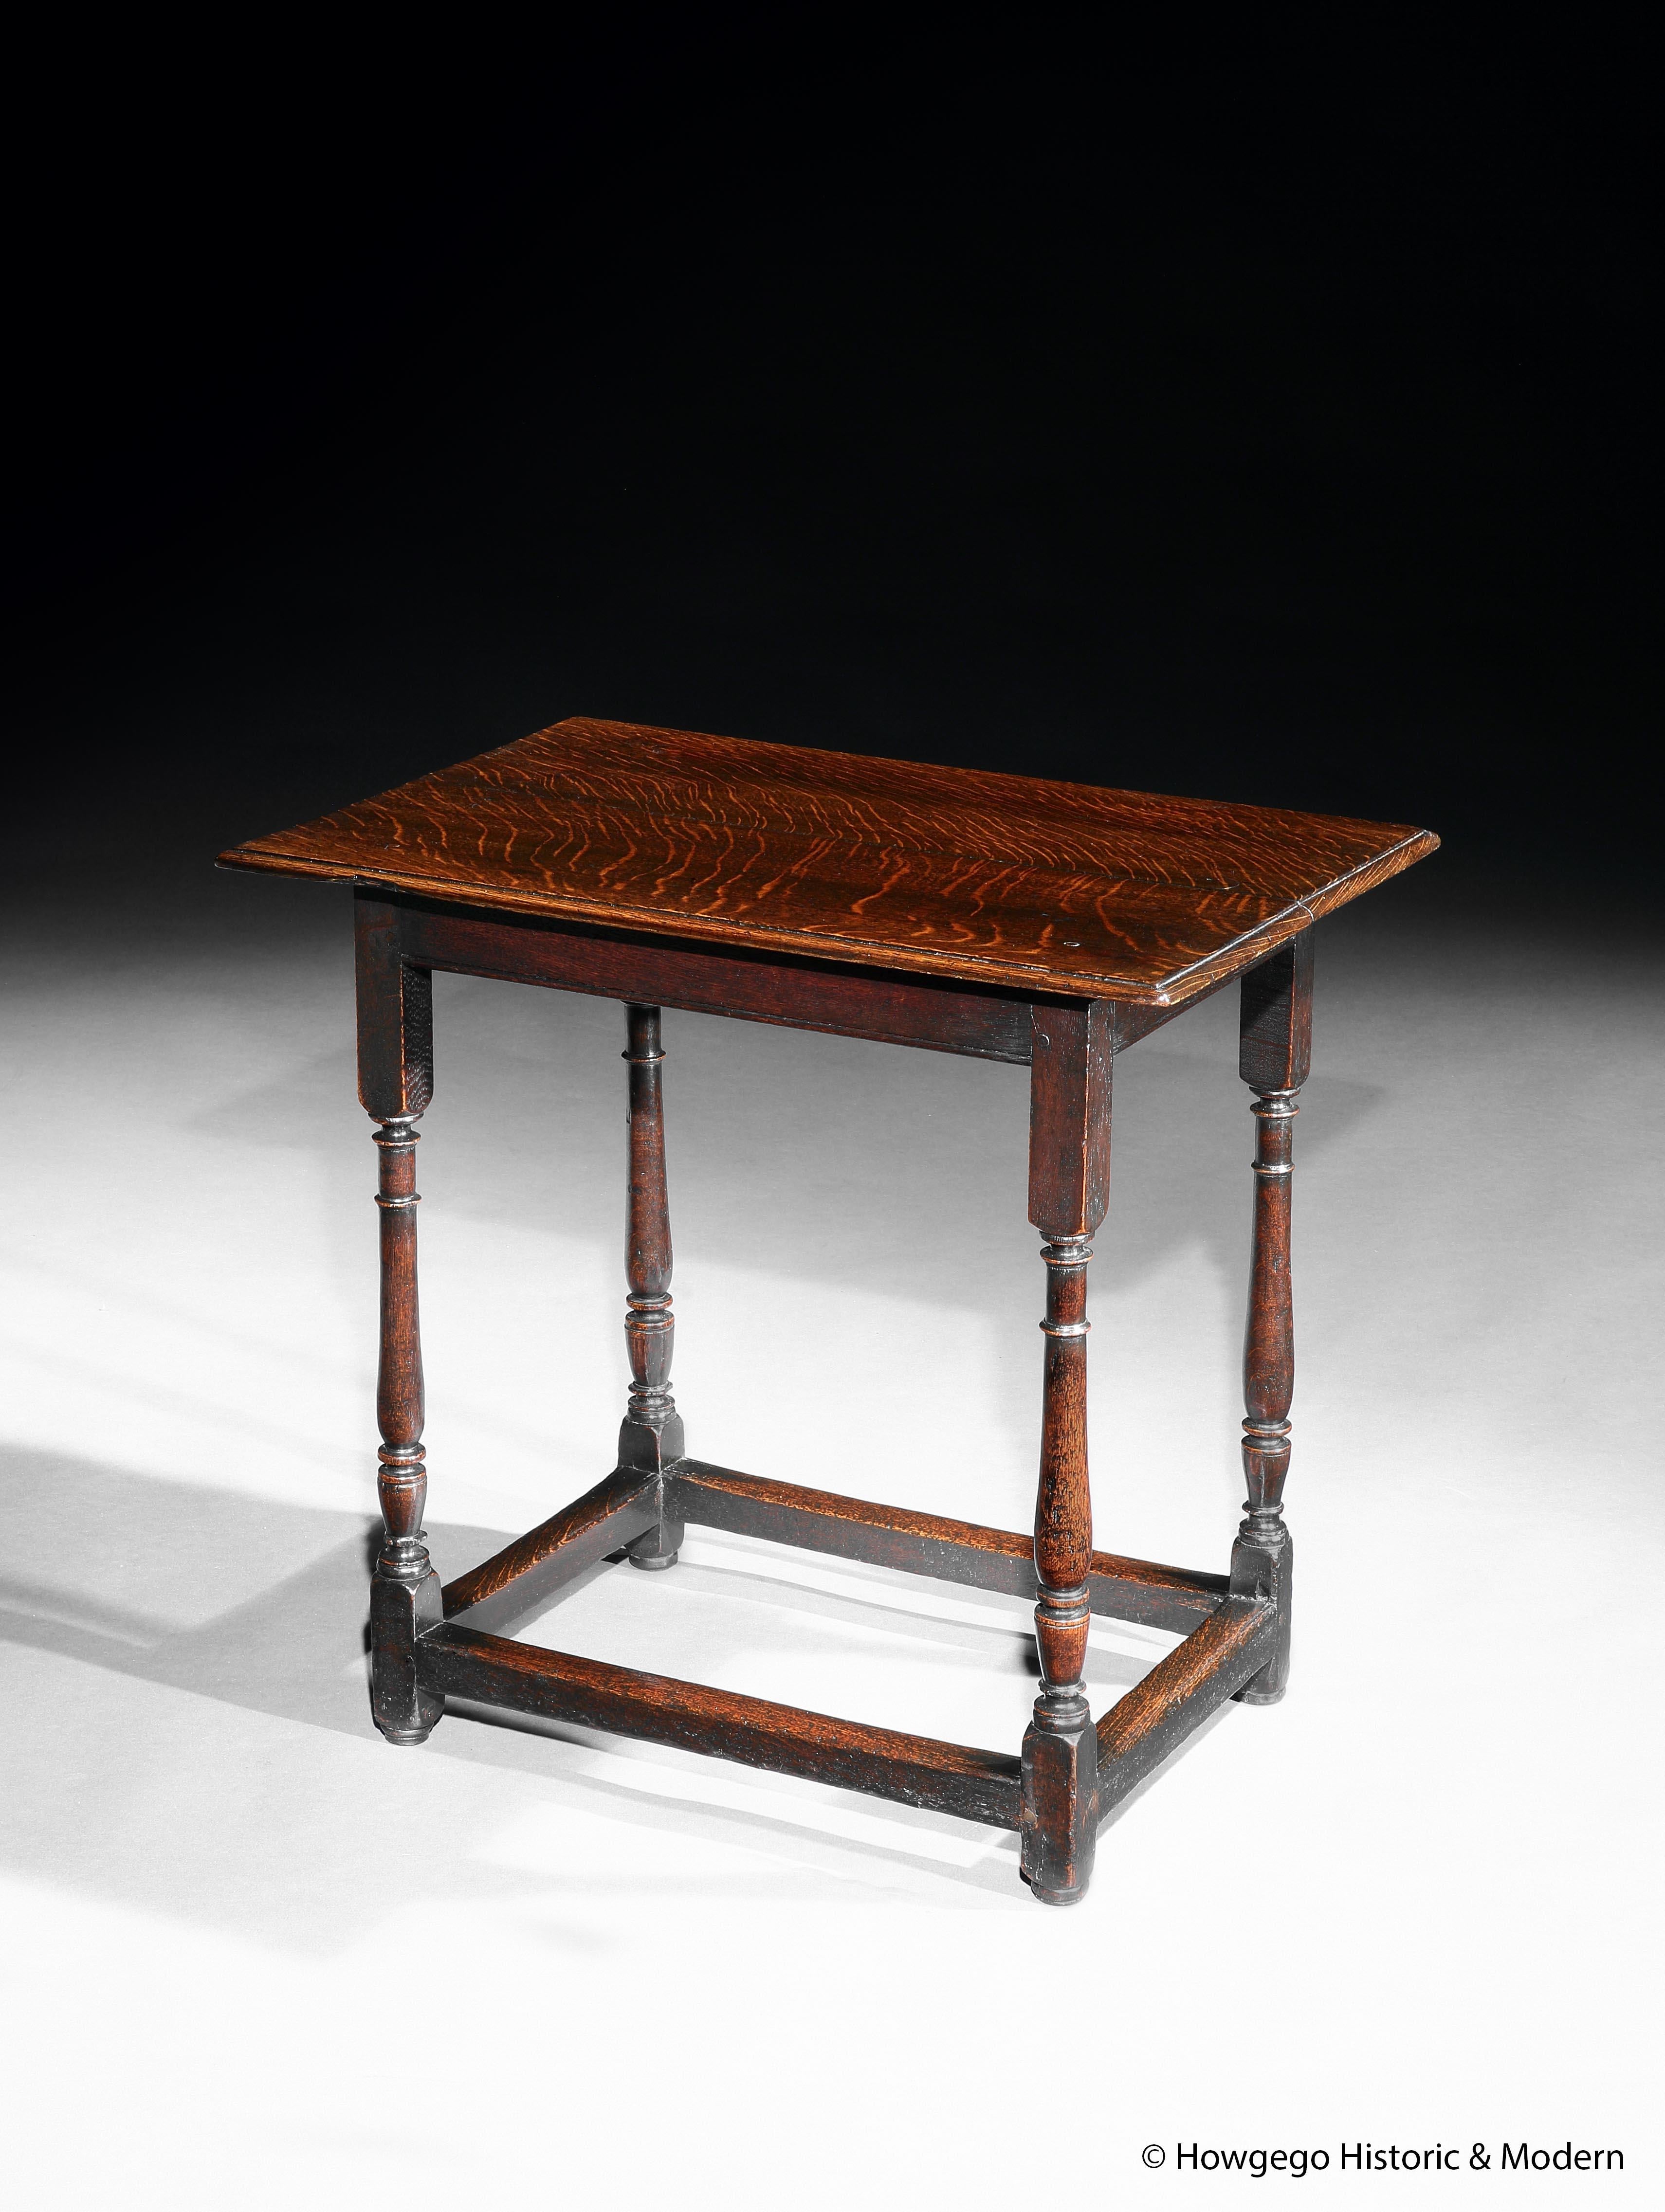 This elegant centre or sidetable is an unusual small size. 
It has a pared down form with no frieze drawer and would Stand well in a contemporary interior
The carpenter has used high quality quarter sawn oak with numerous medullary rays which he